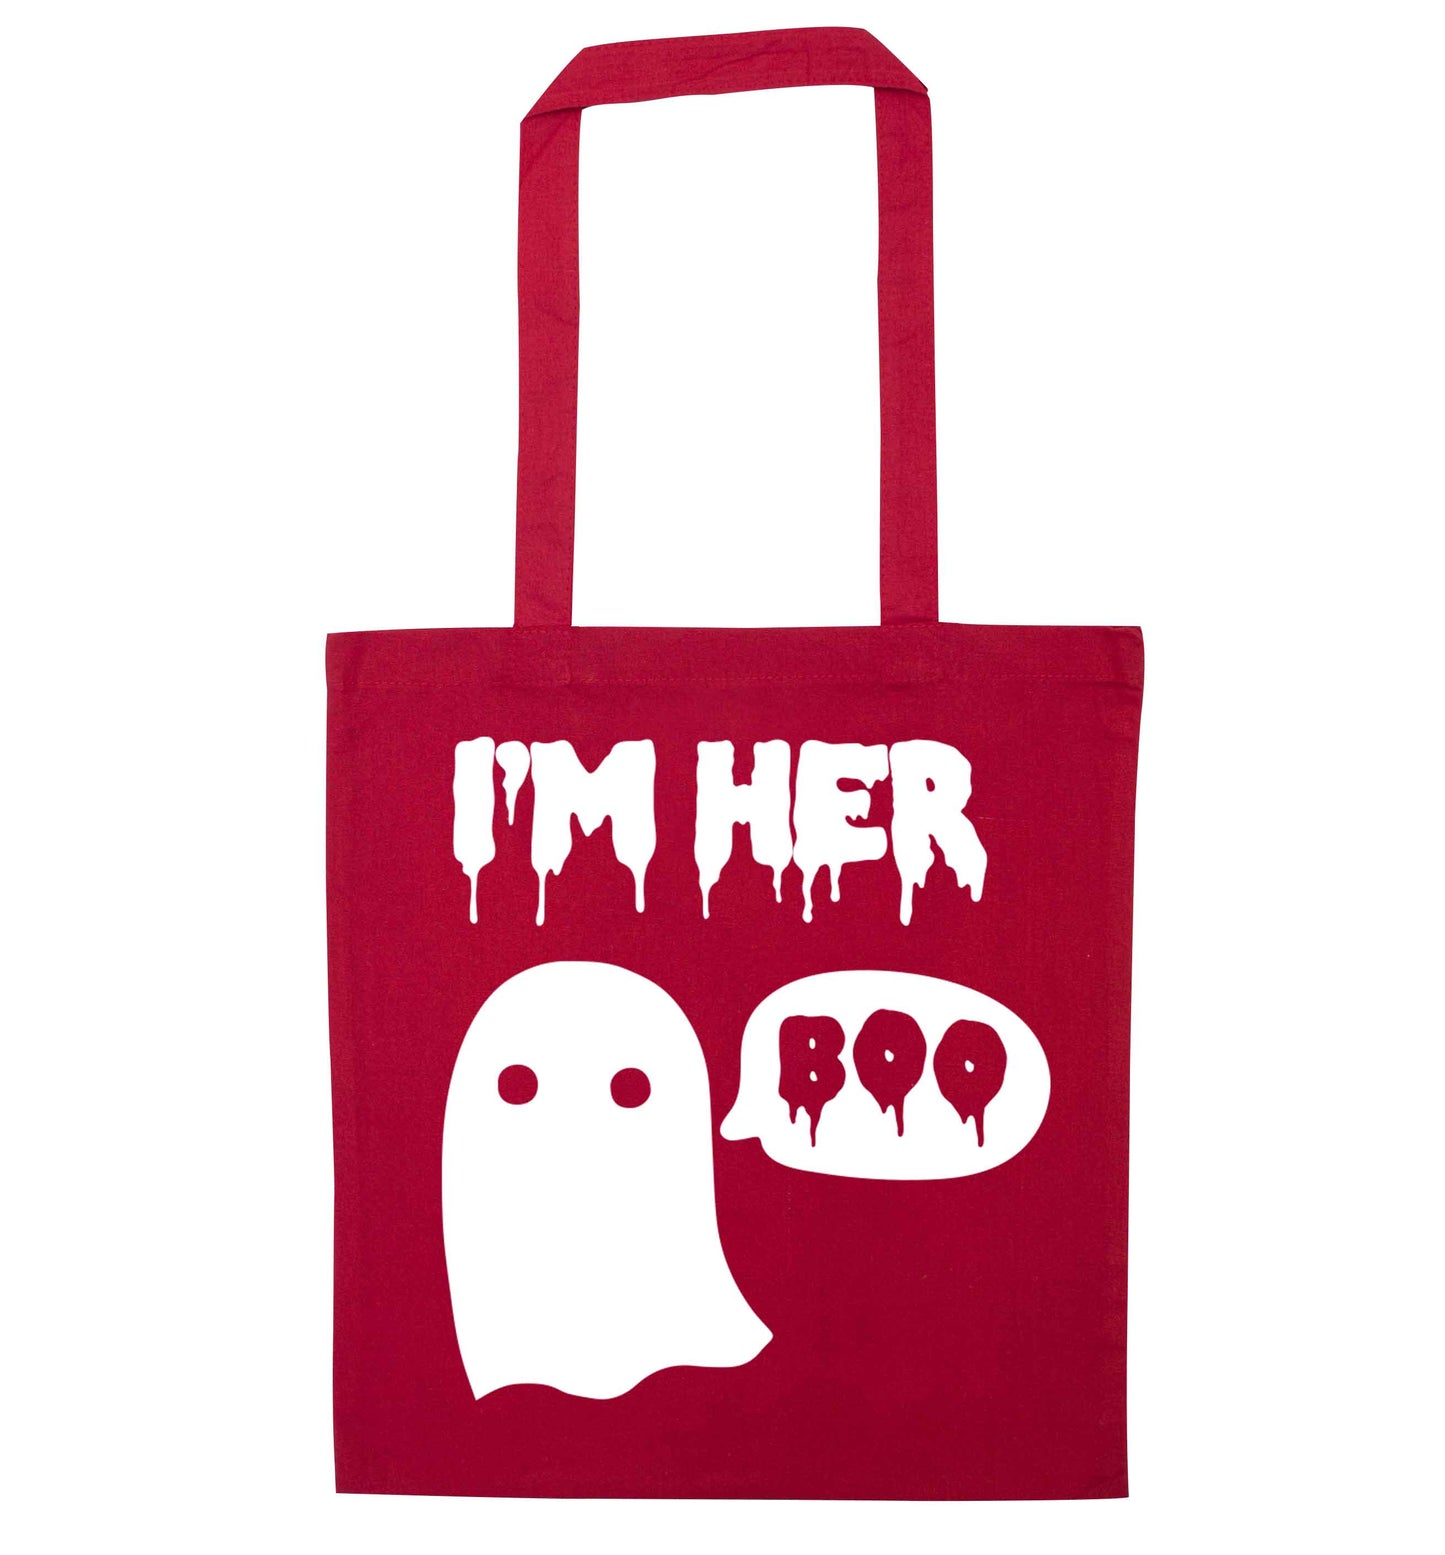 I'm her boo red tote bag